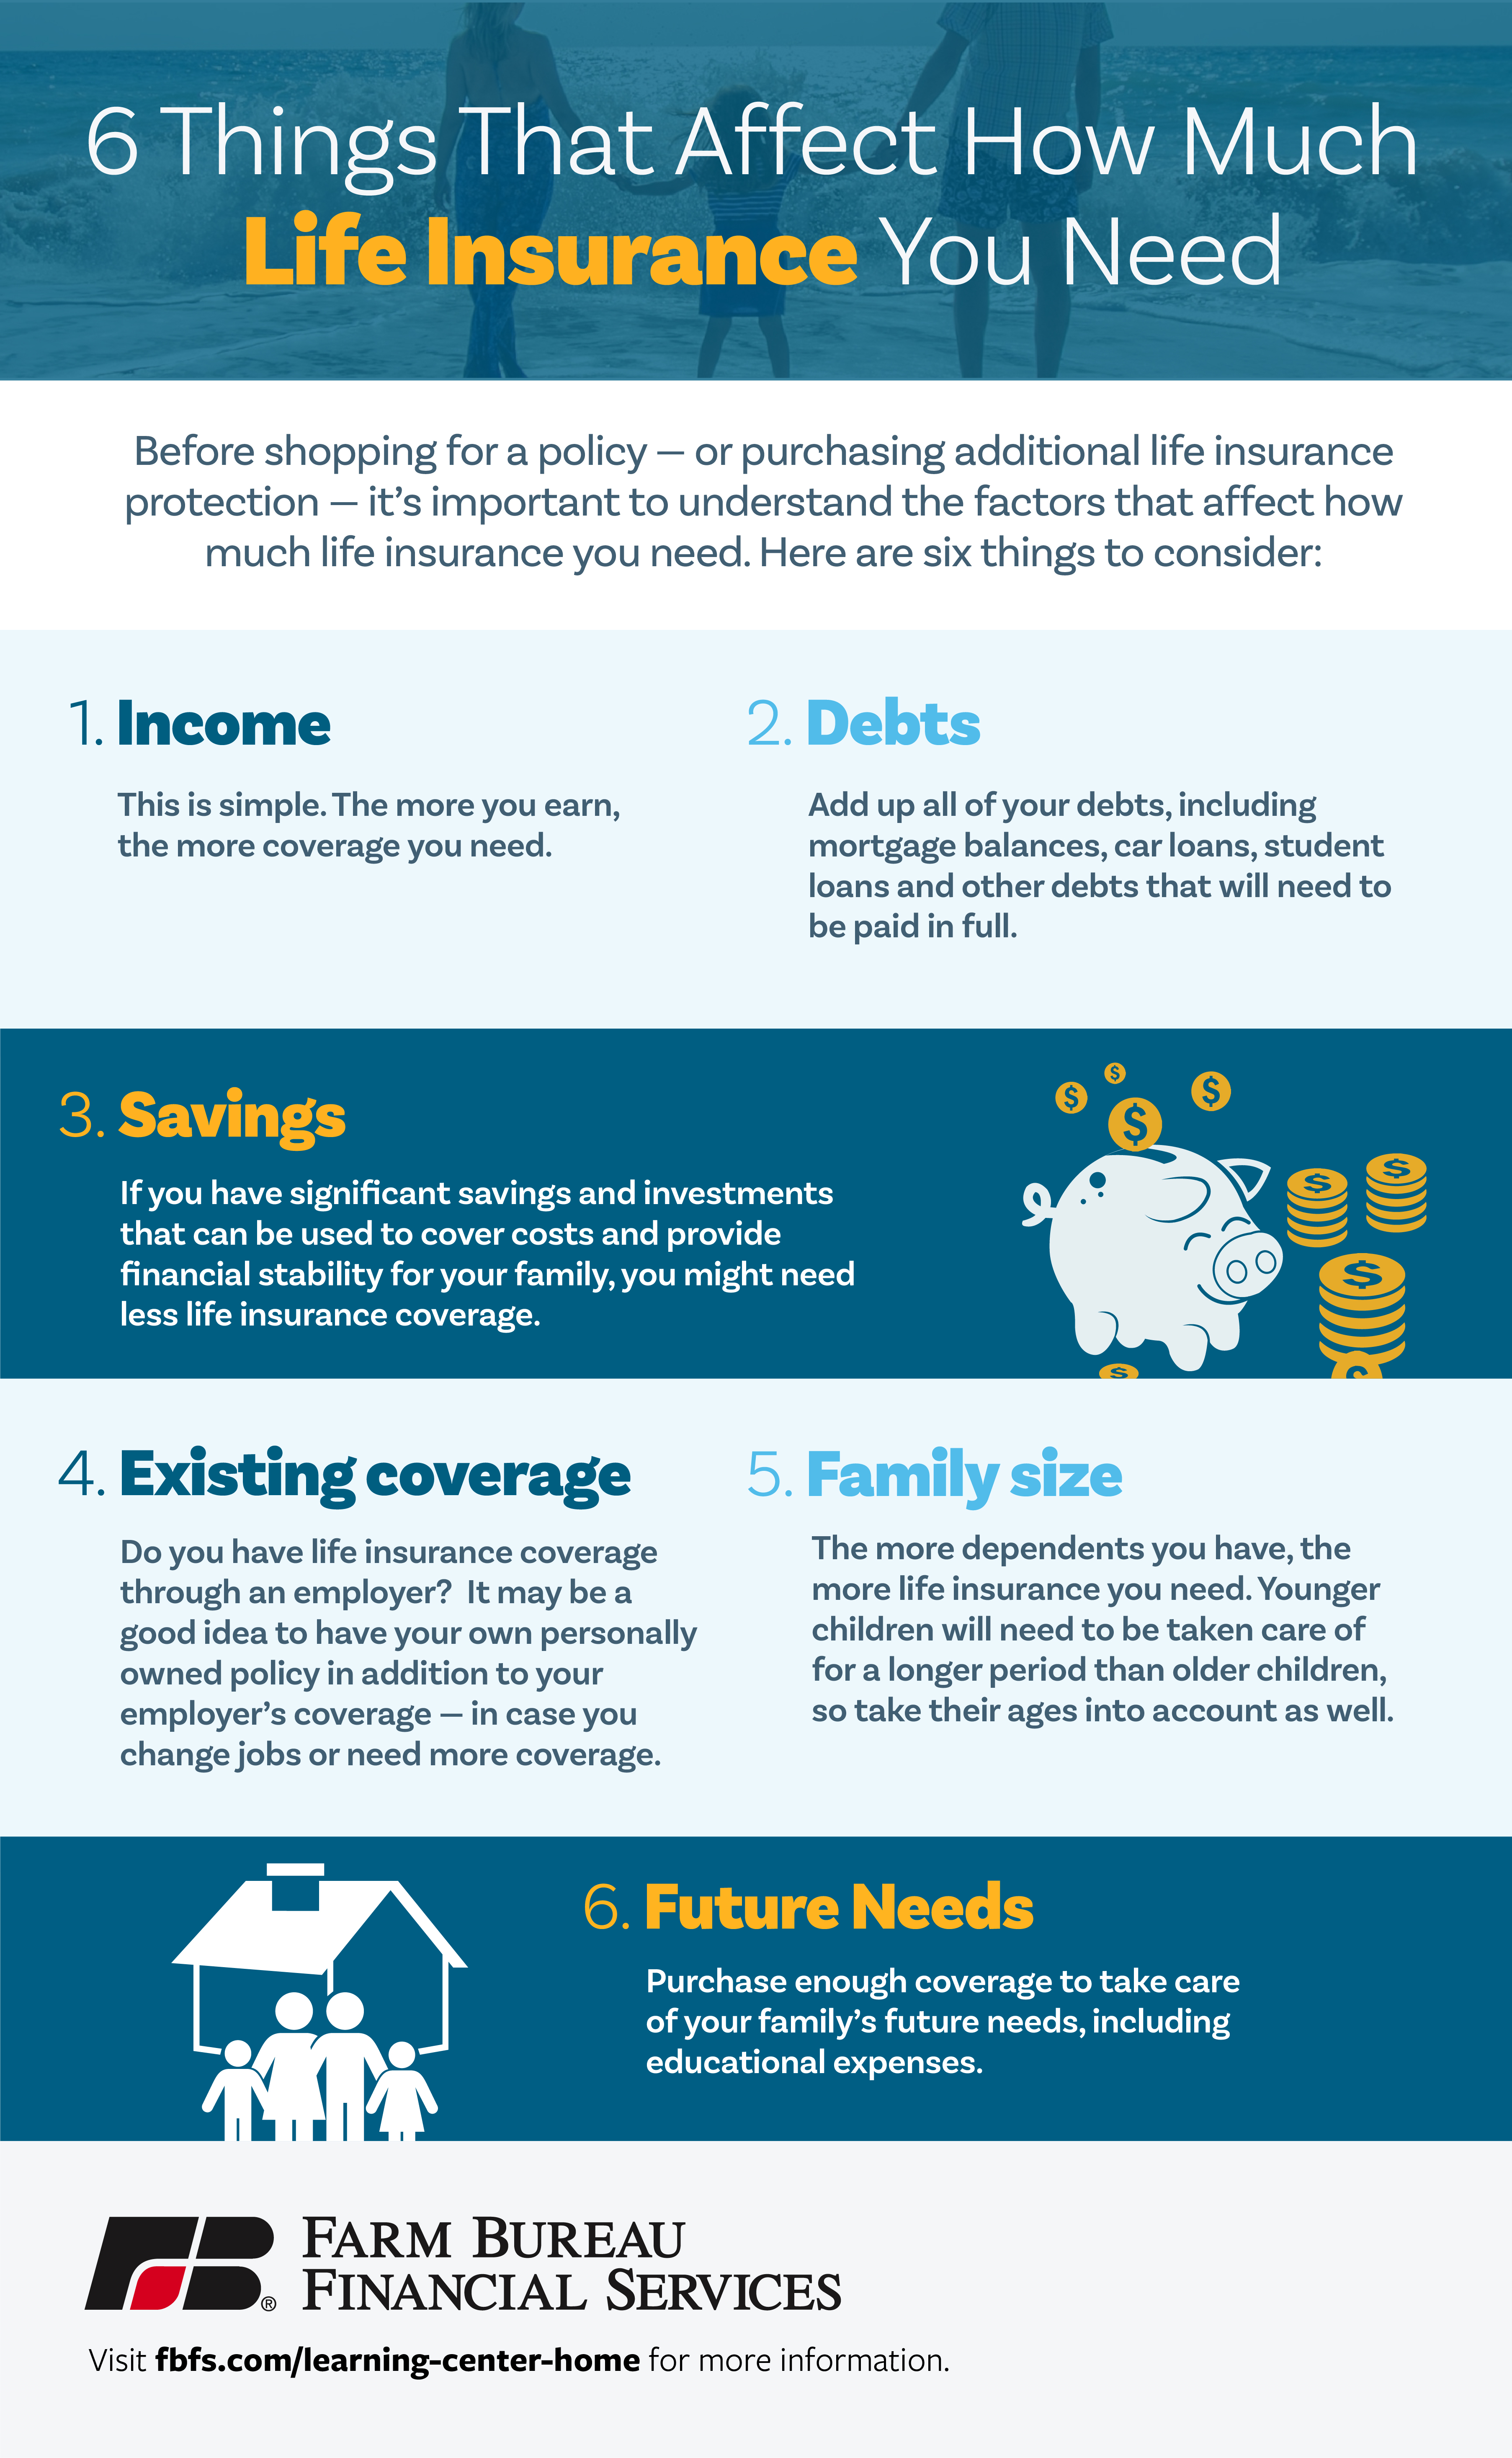 How Much Life Insurance Do You Need? 6 Factors You Need to Consider  Farm Bureau Financial Services